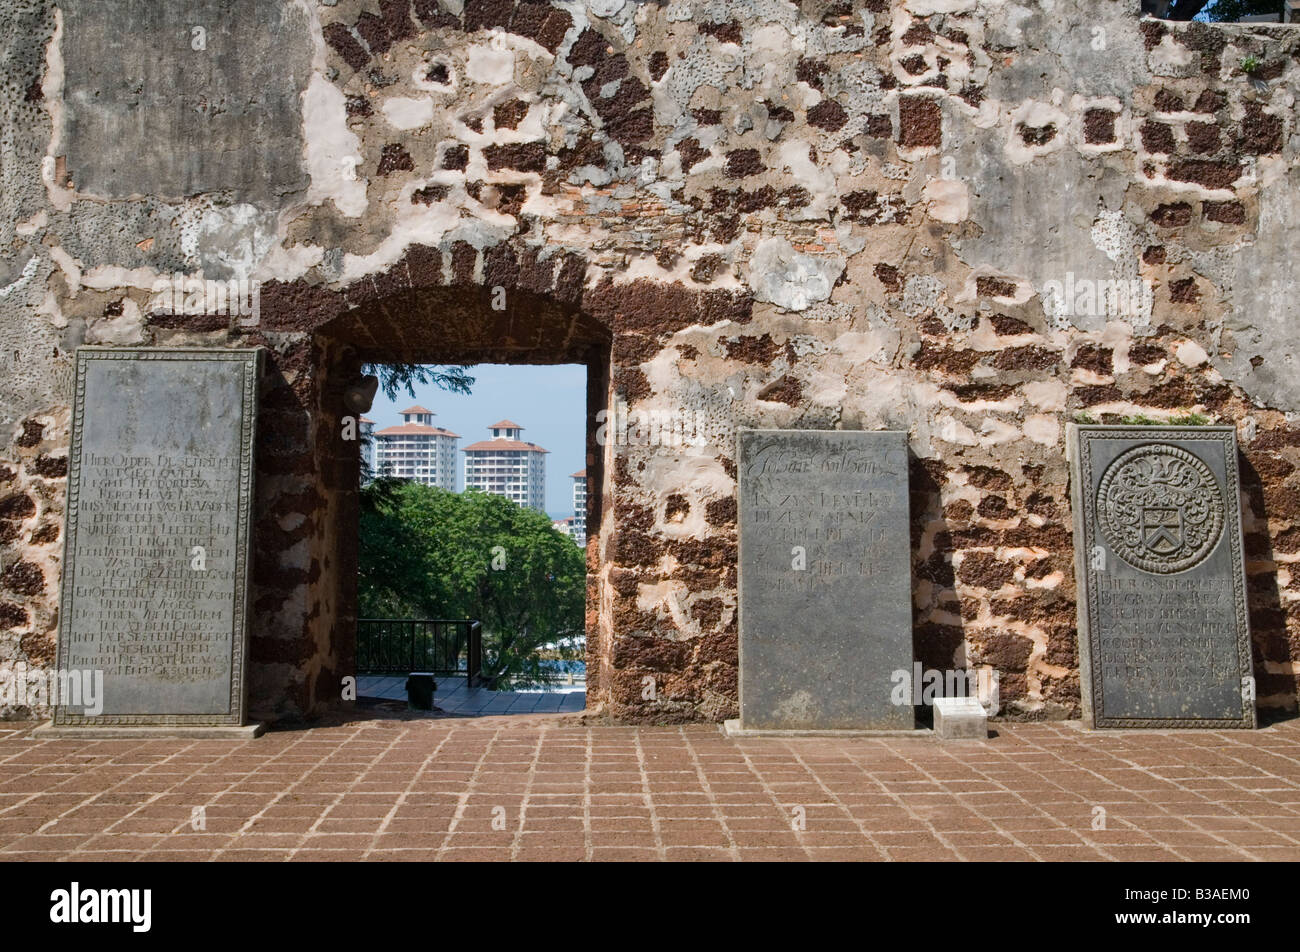 Looking at the past with a window to the future - Old Dutch tombstones in the ruins of the Portuguese built St. Pauls Church, Malacca, Malaysia Stock Photo